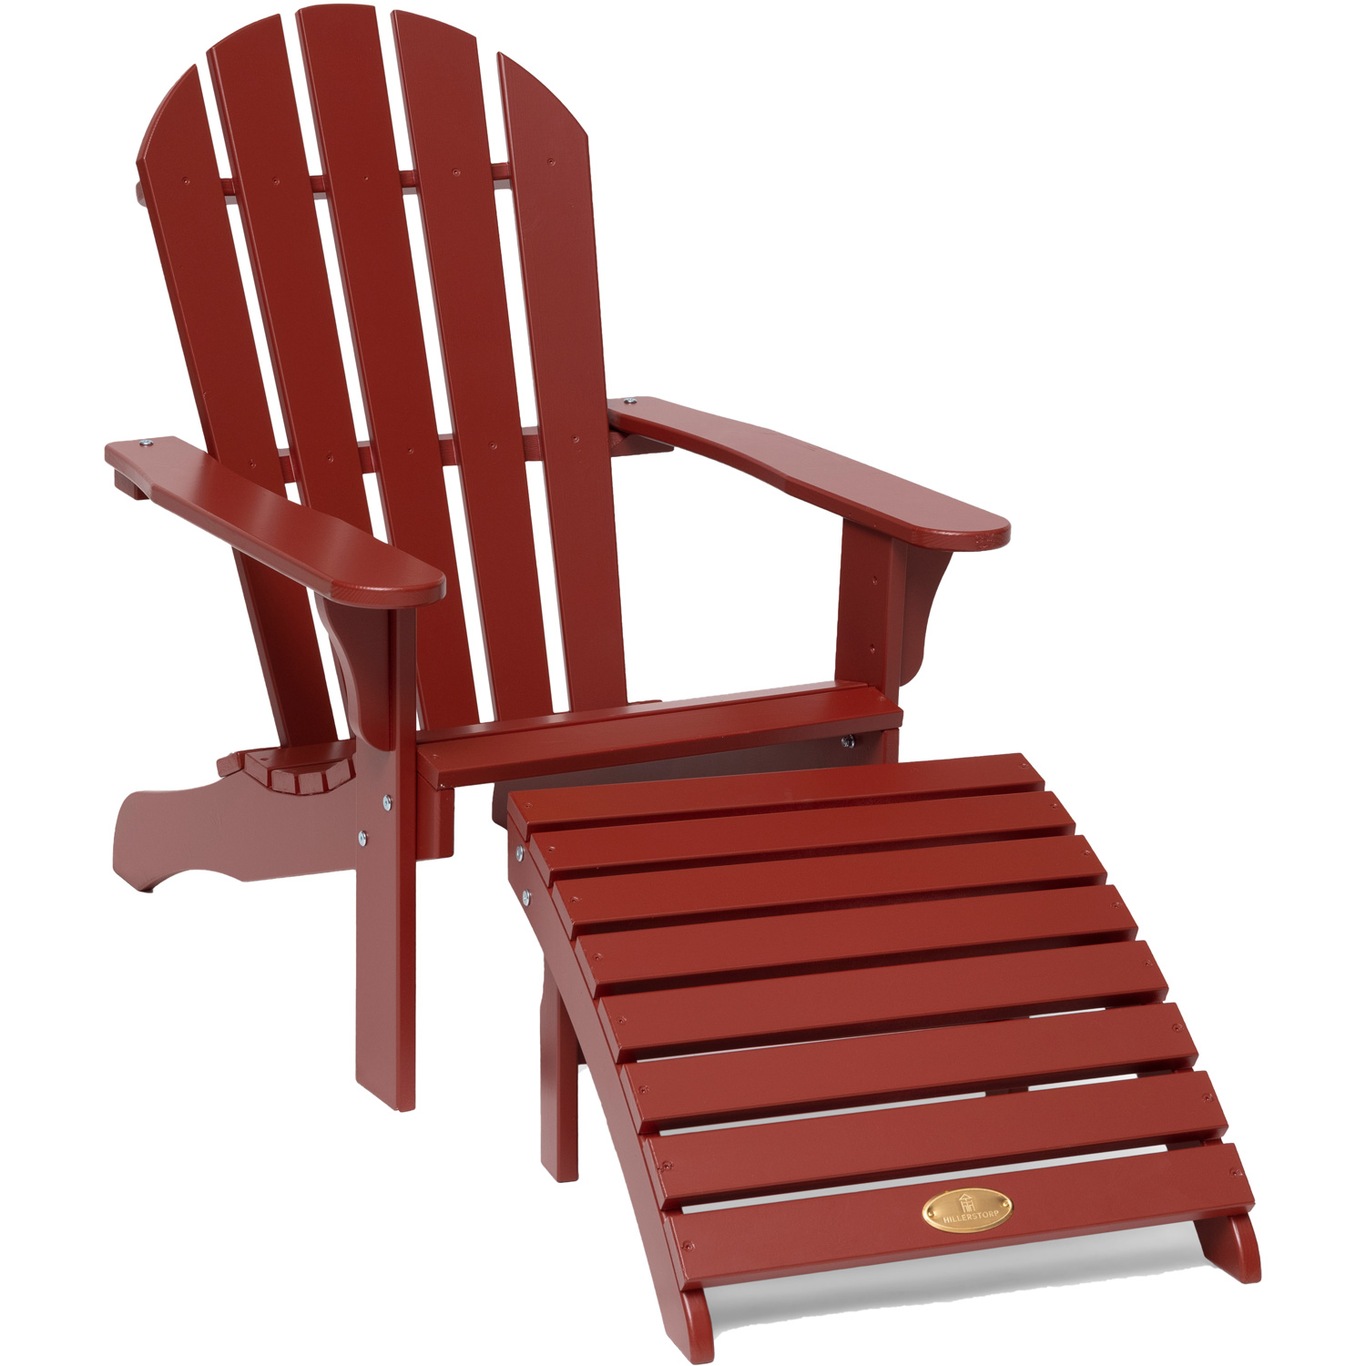 Tennessee Deckchair With Footstool, Oxide Red